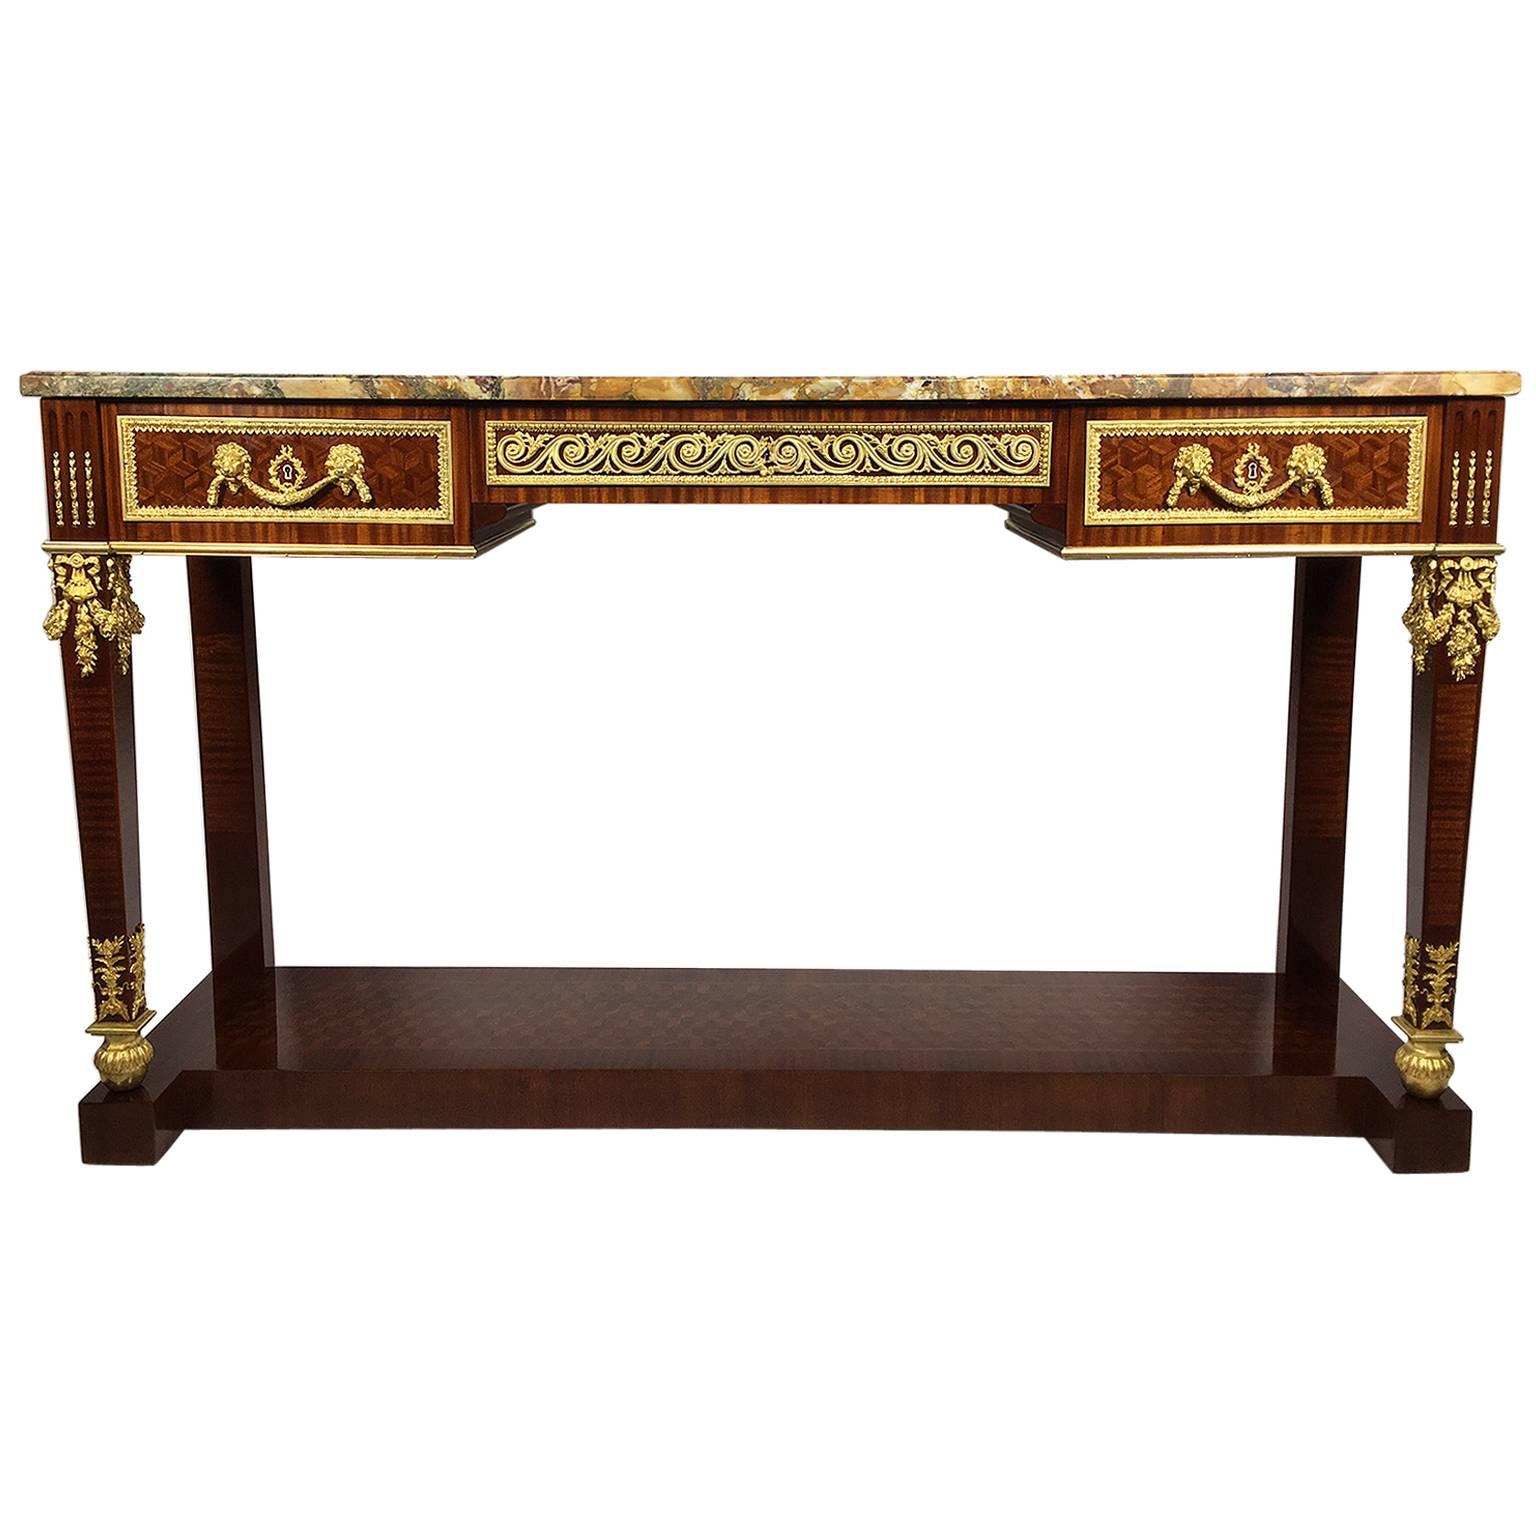 19th-20th Century Louis XVI Style Gilt-Bronze Mounted Console Table by Forest